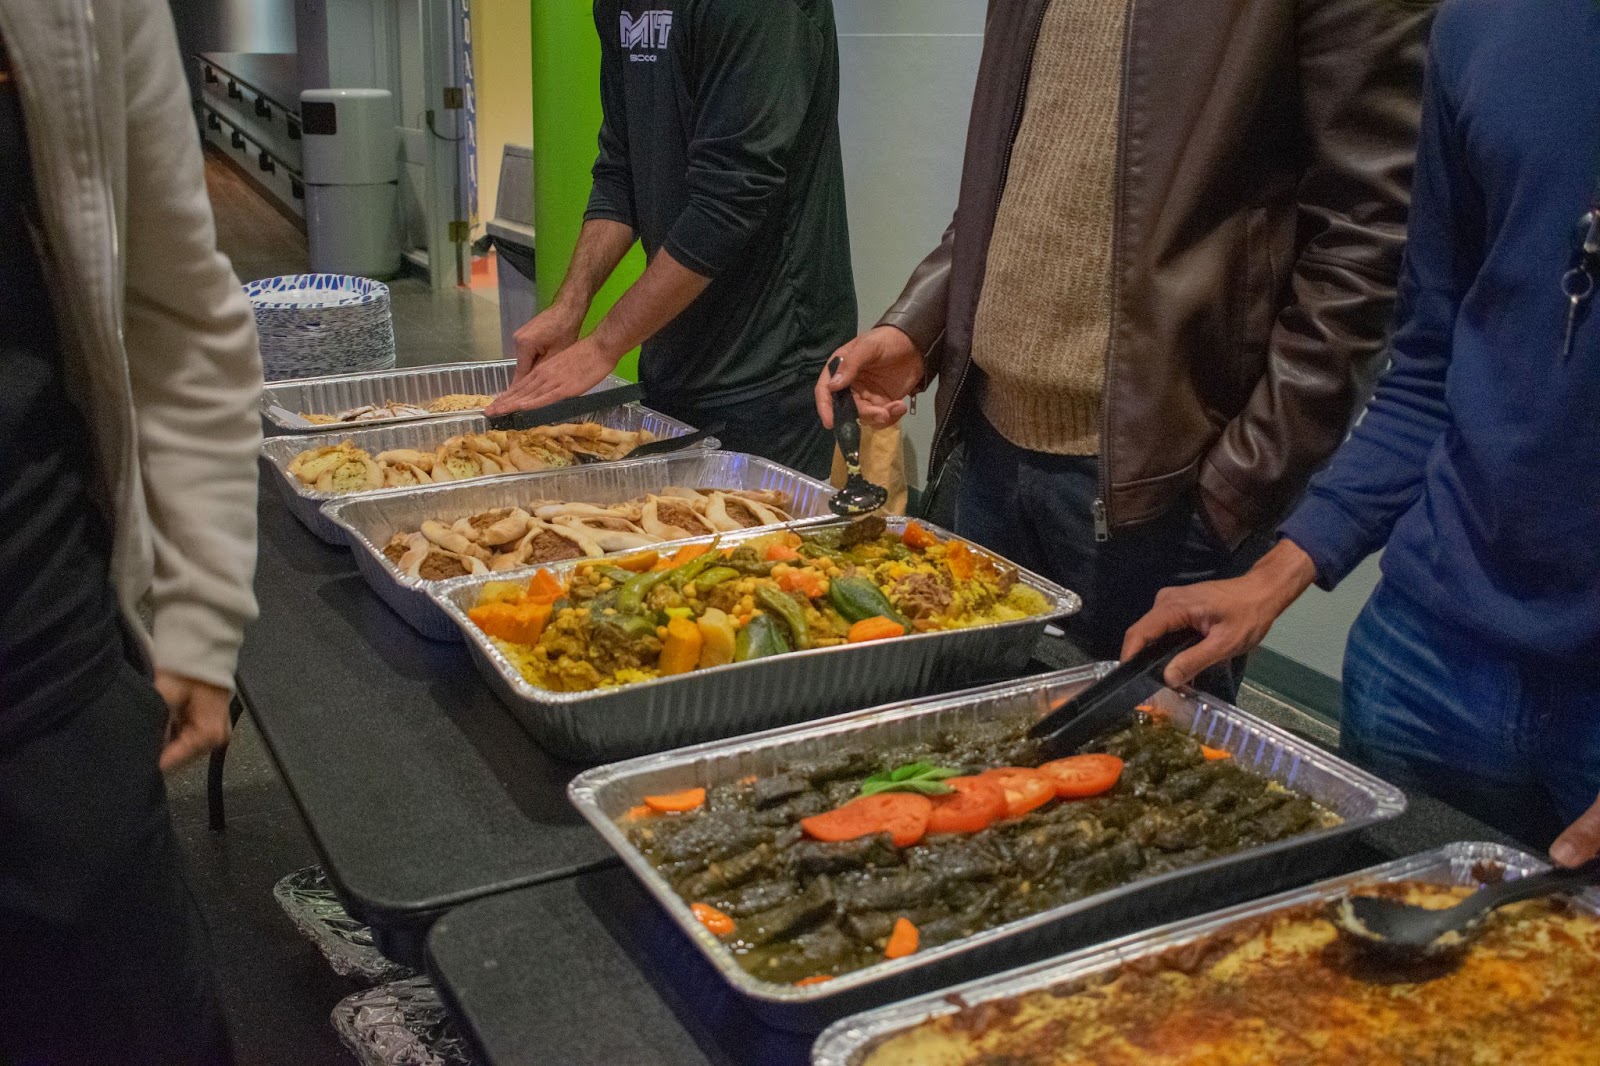 A close-up of large trays of food on a table and people serving themselves.